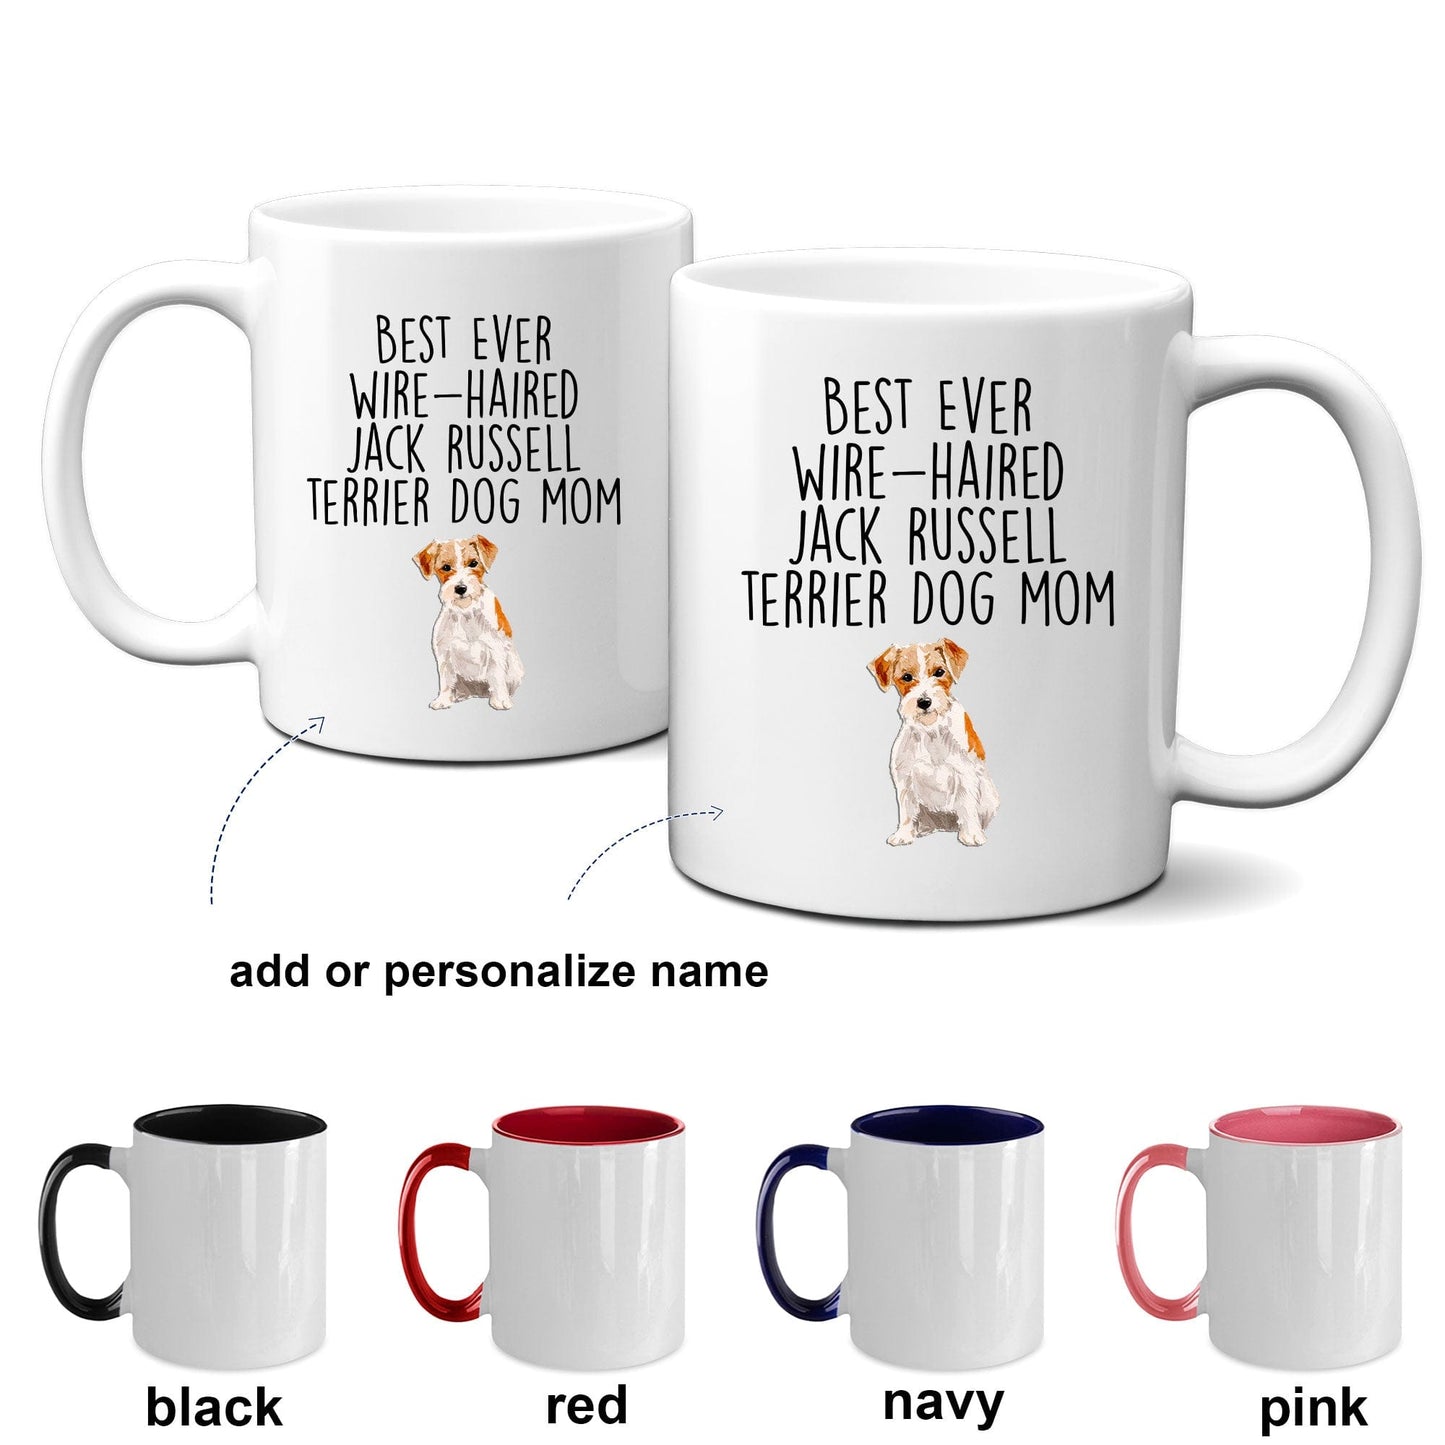 Best Ever Wire-haired Jack Russell Terrier Dog Mom Custom Ceramic Coffee Mug